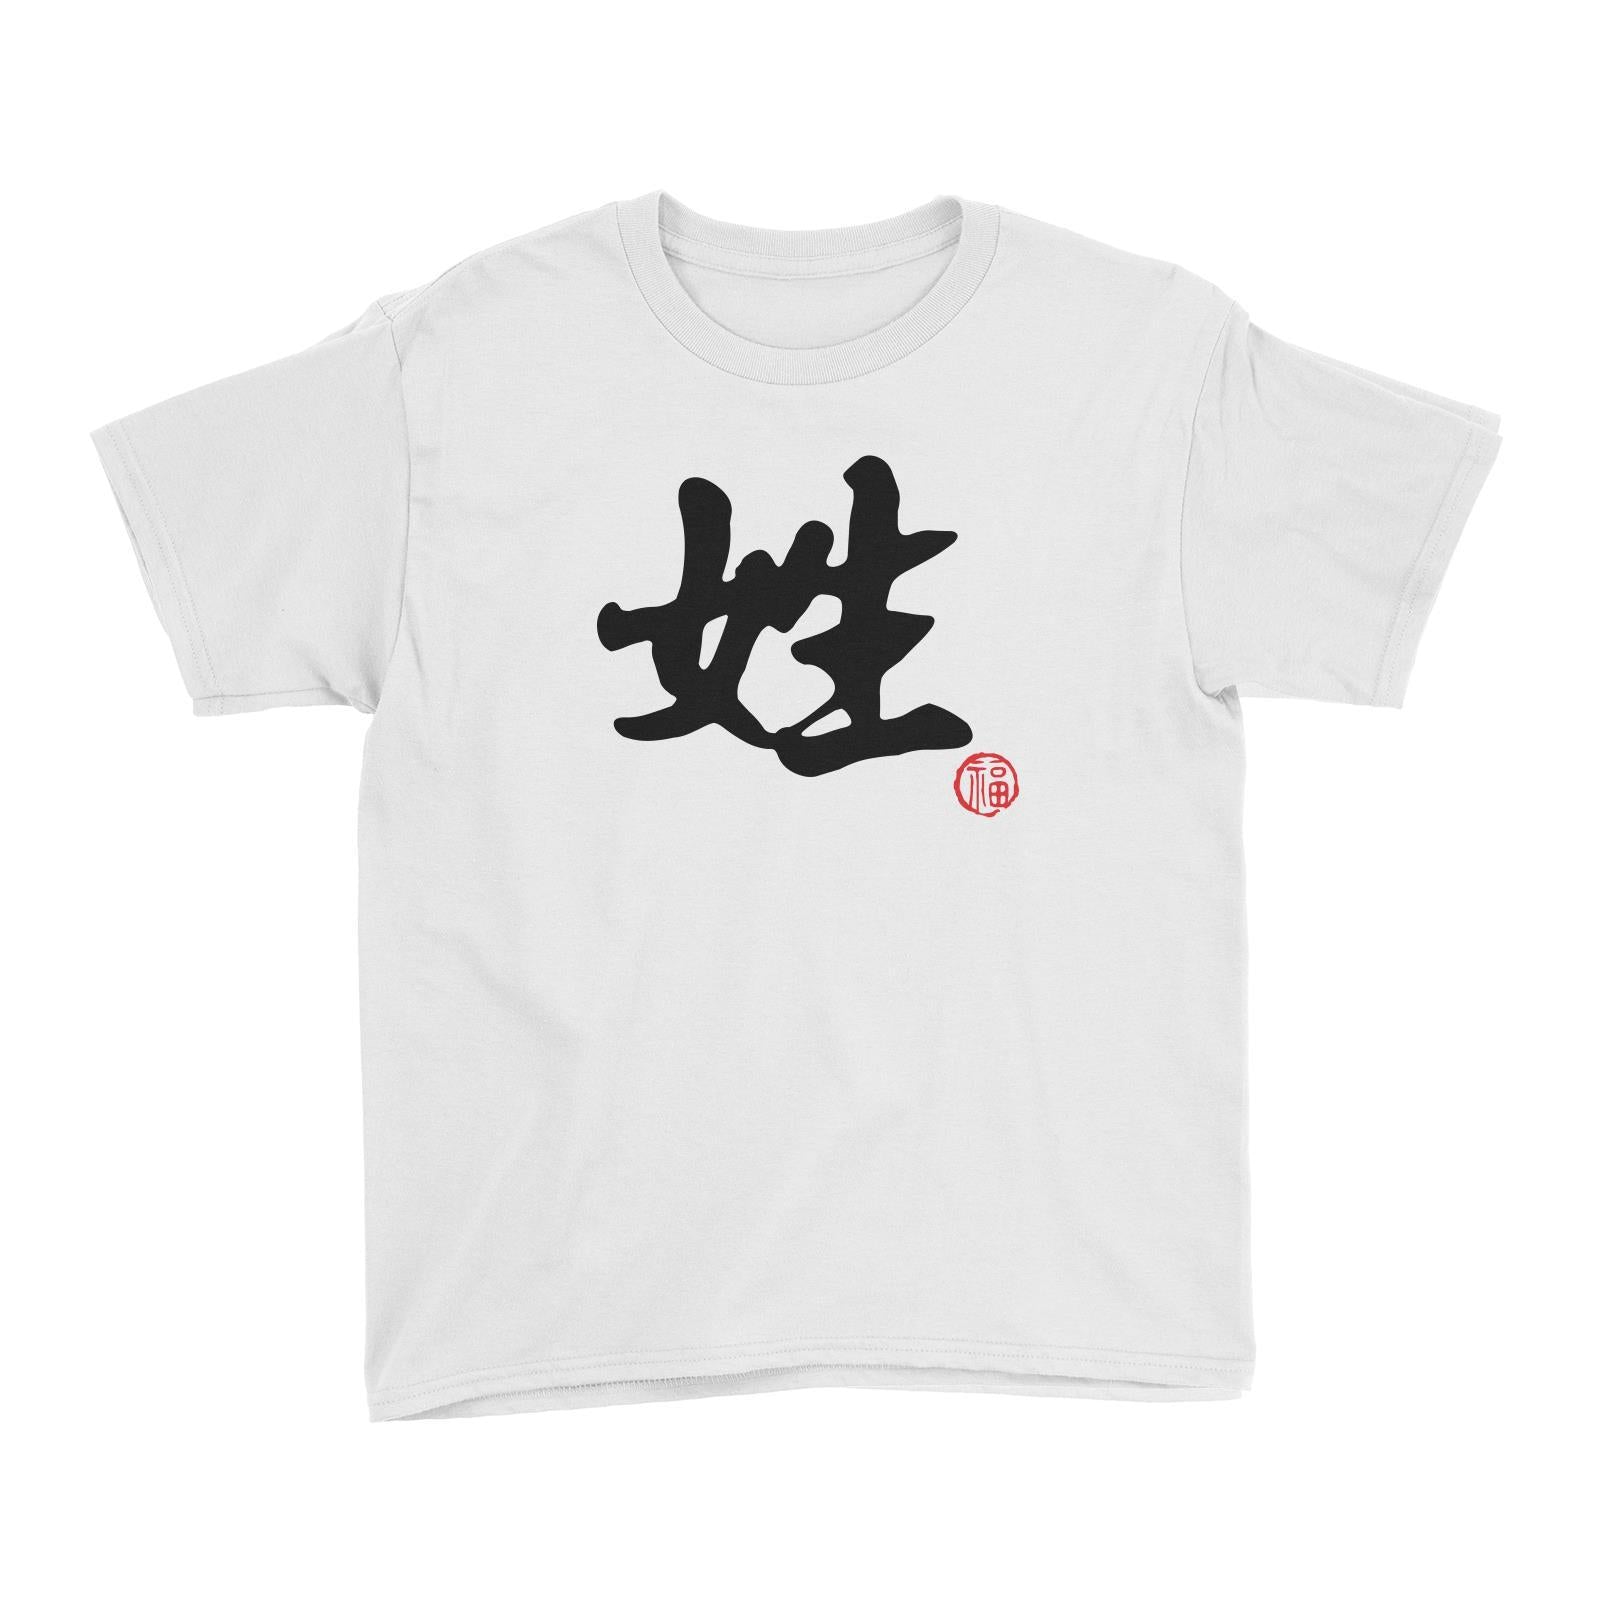 Chinese Surname B&W with Prosperity Seal Kid's T-Shirt Matching Family Personalizable Designs